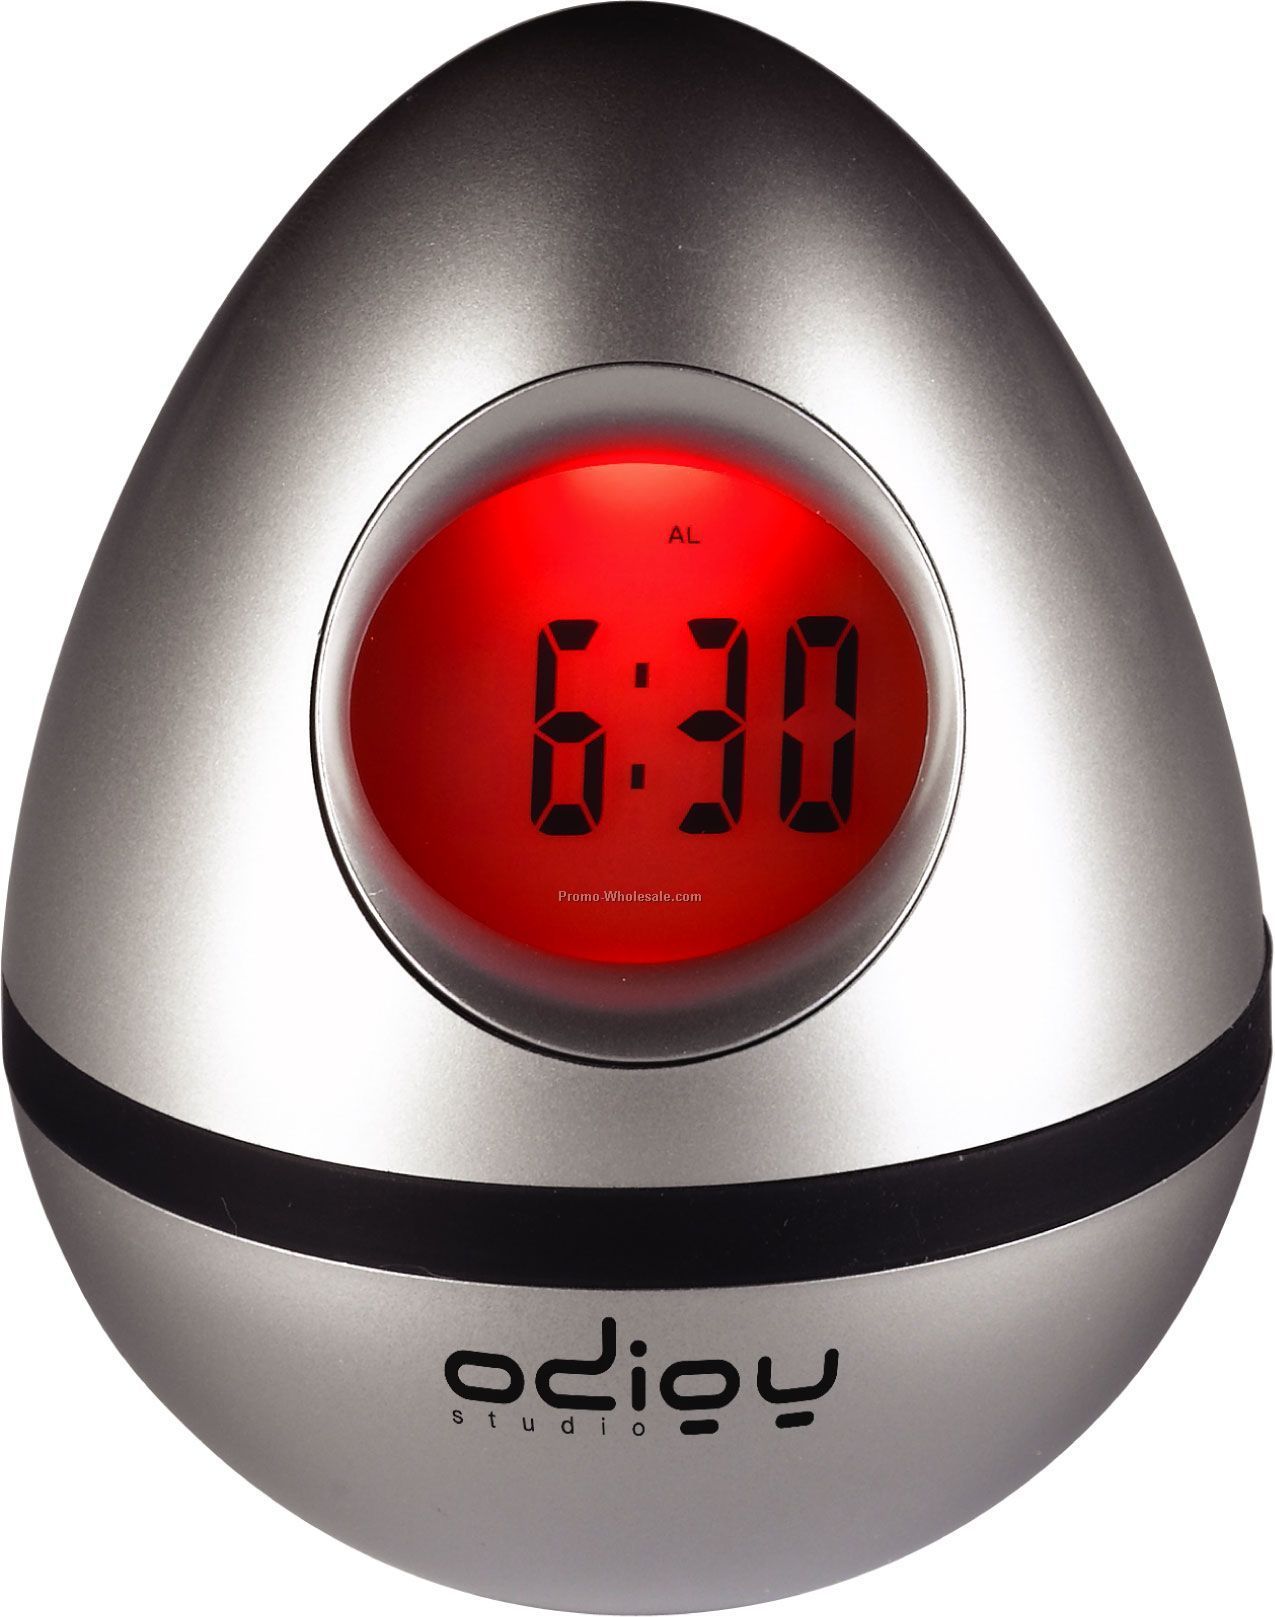 5-in-1 Color Changing Alarm Clock